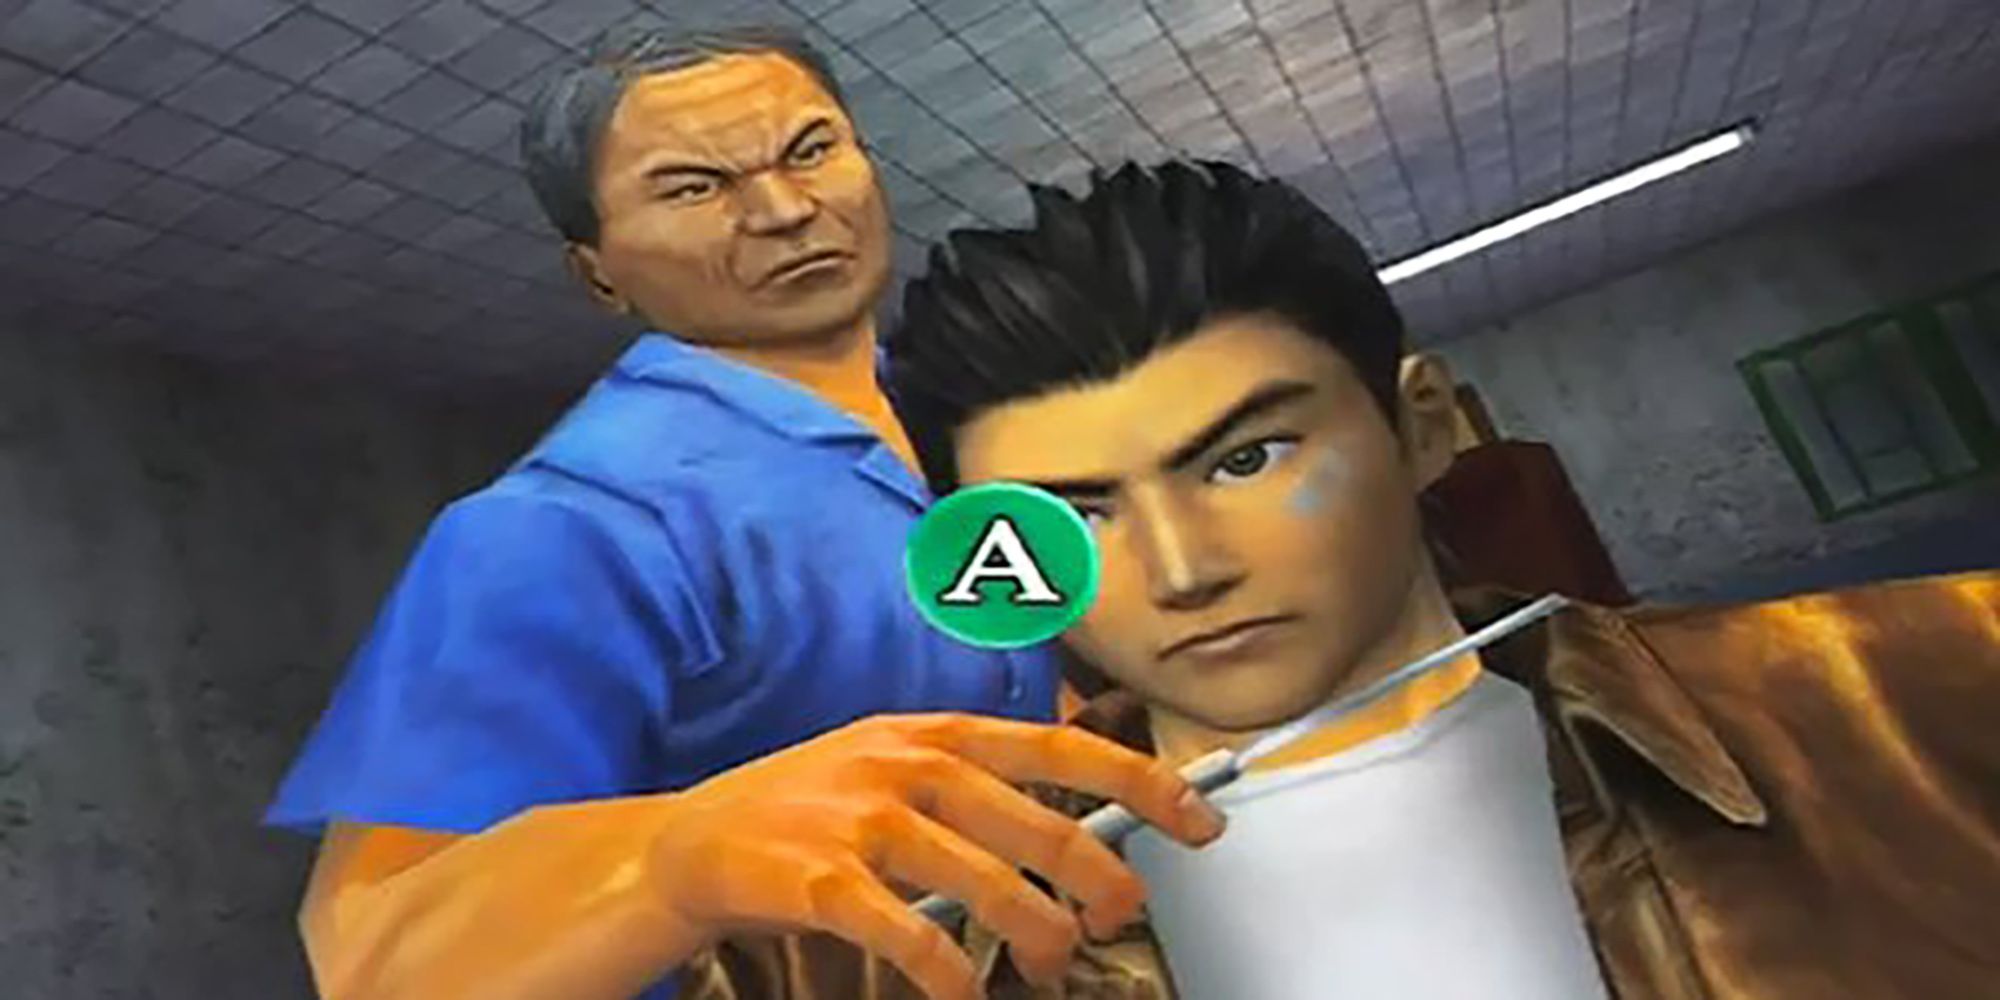 Ryo Hazuki remains still while Zhangyu holds a razor blade near his neck in this QTE from Shenmue.